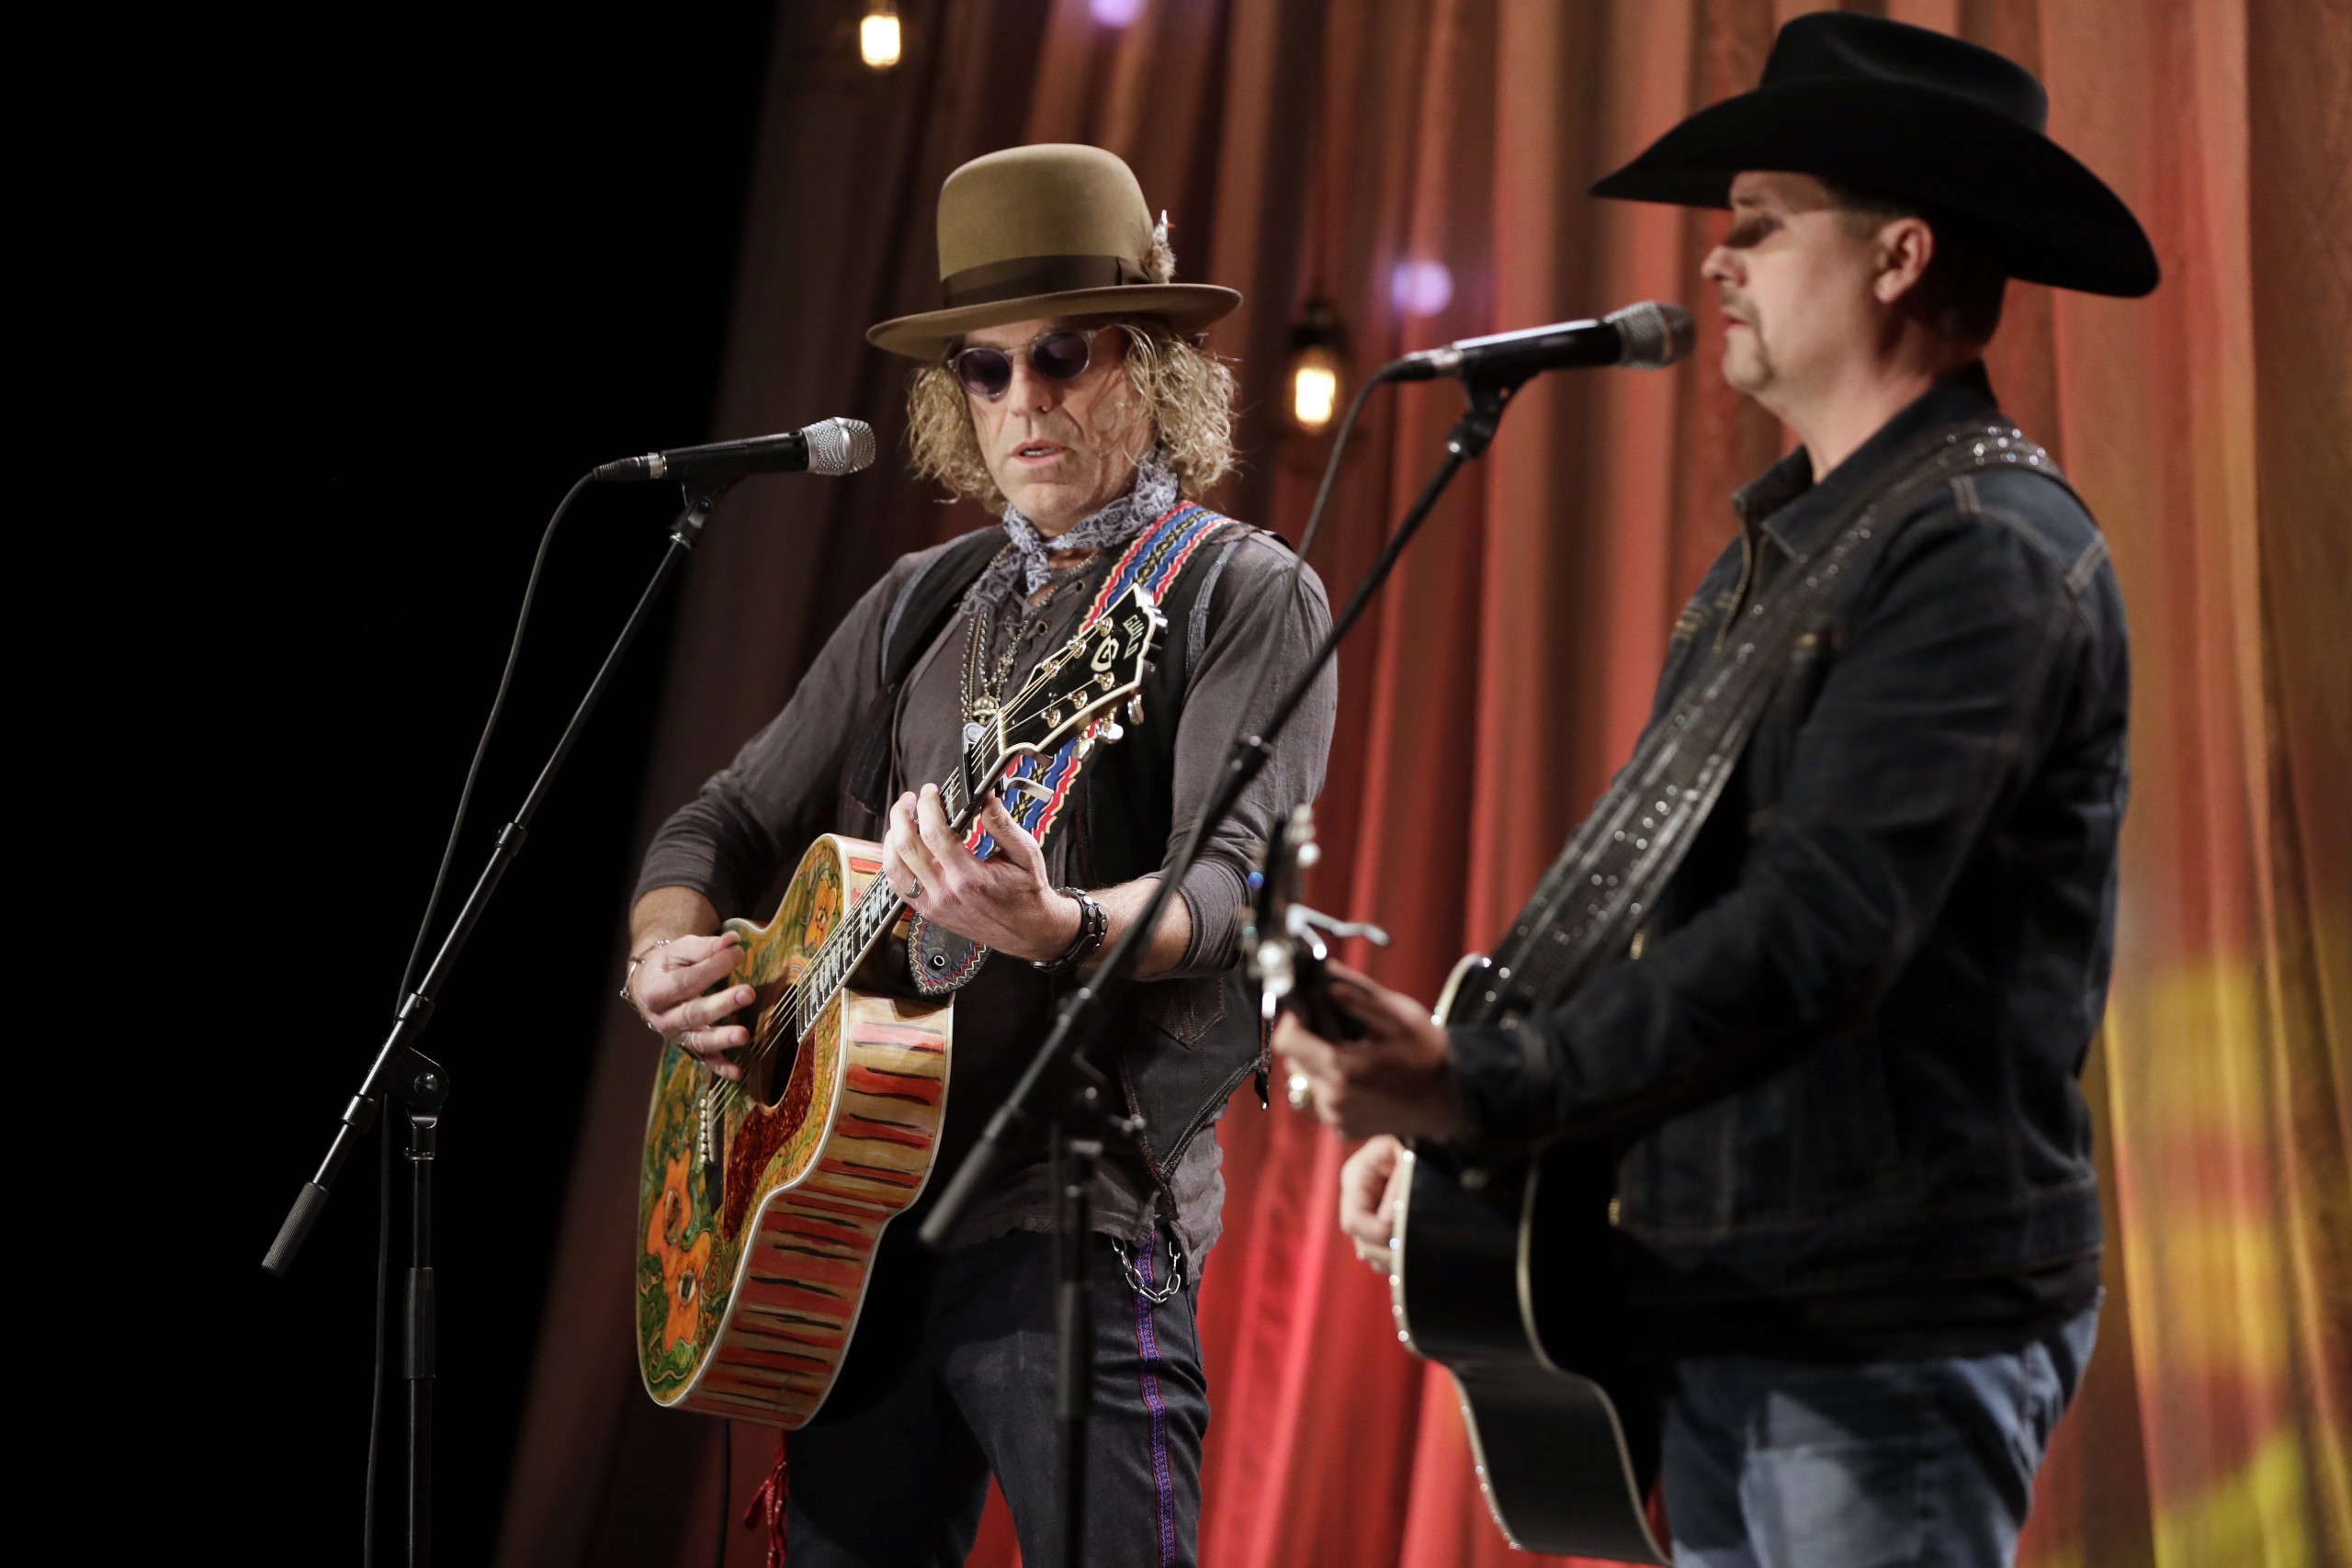 Big And Rich Wallpapers